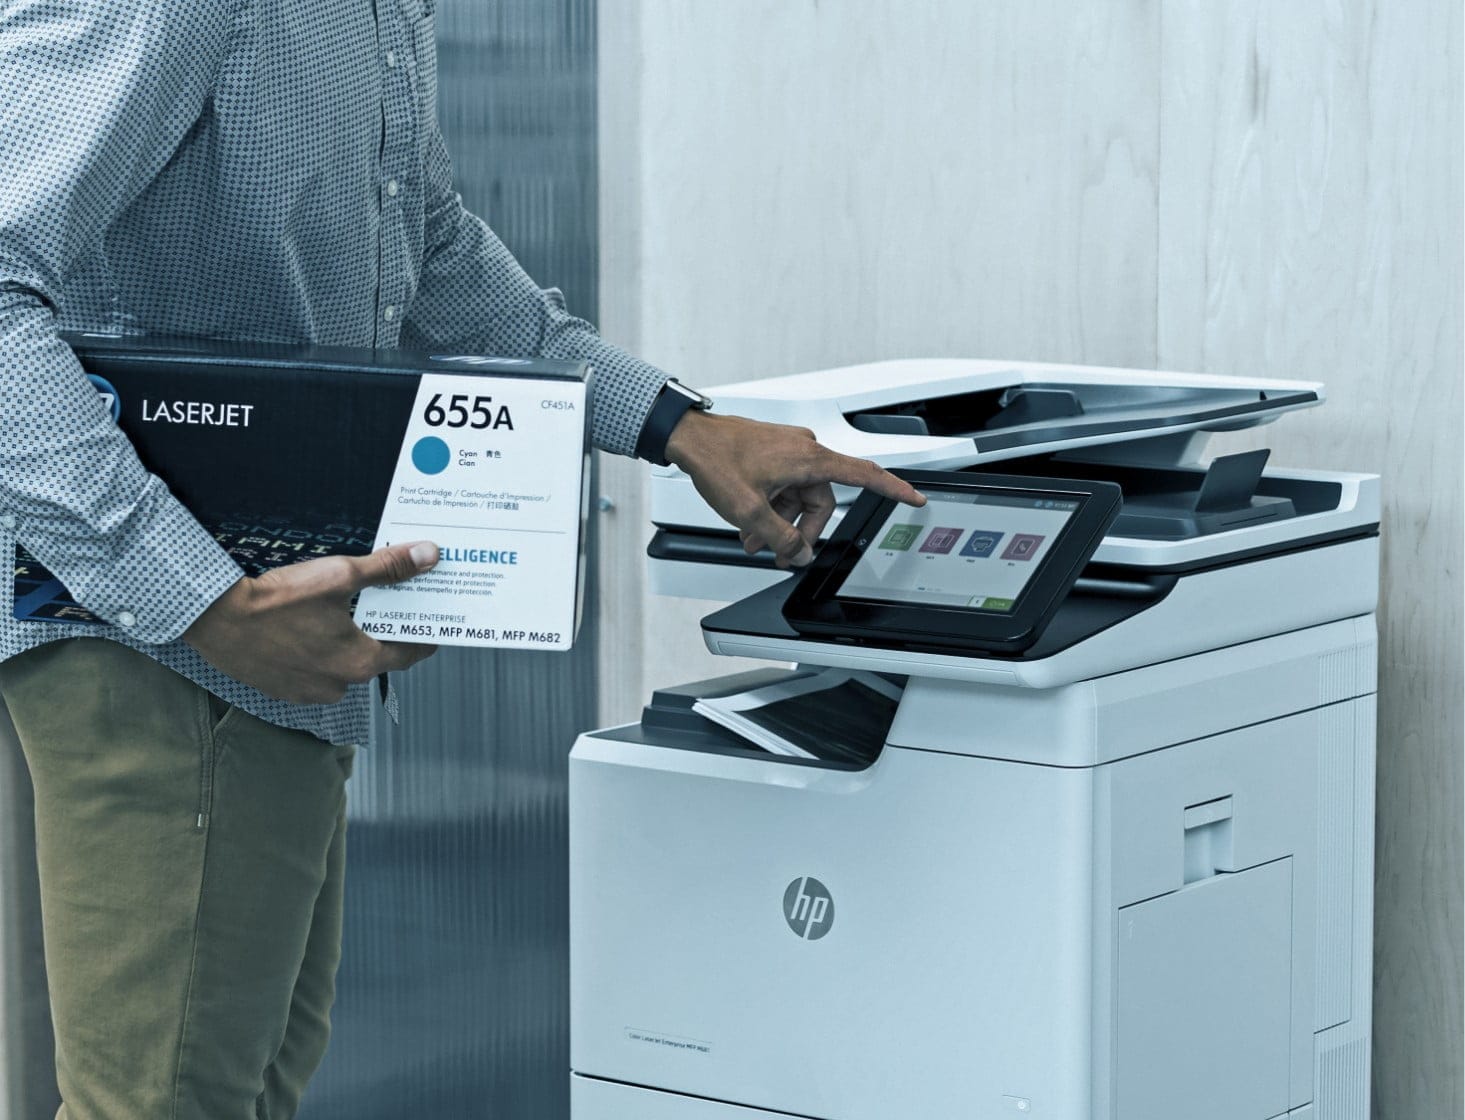 HP Printer Secure | HP® Official Site